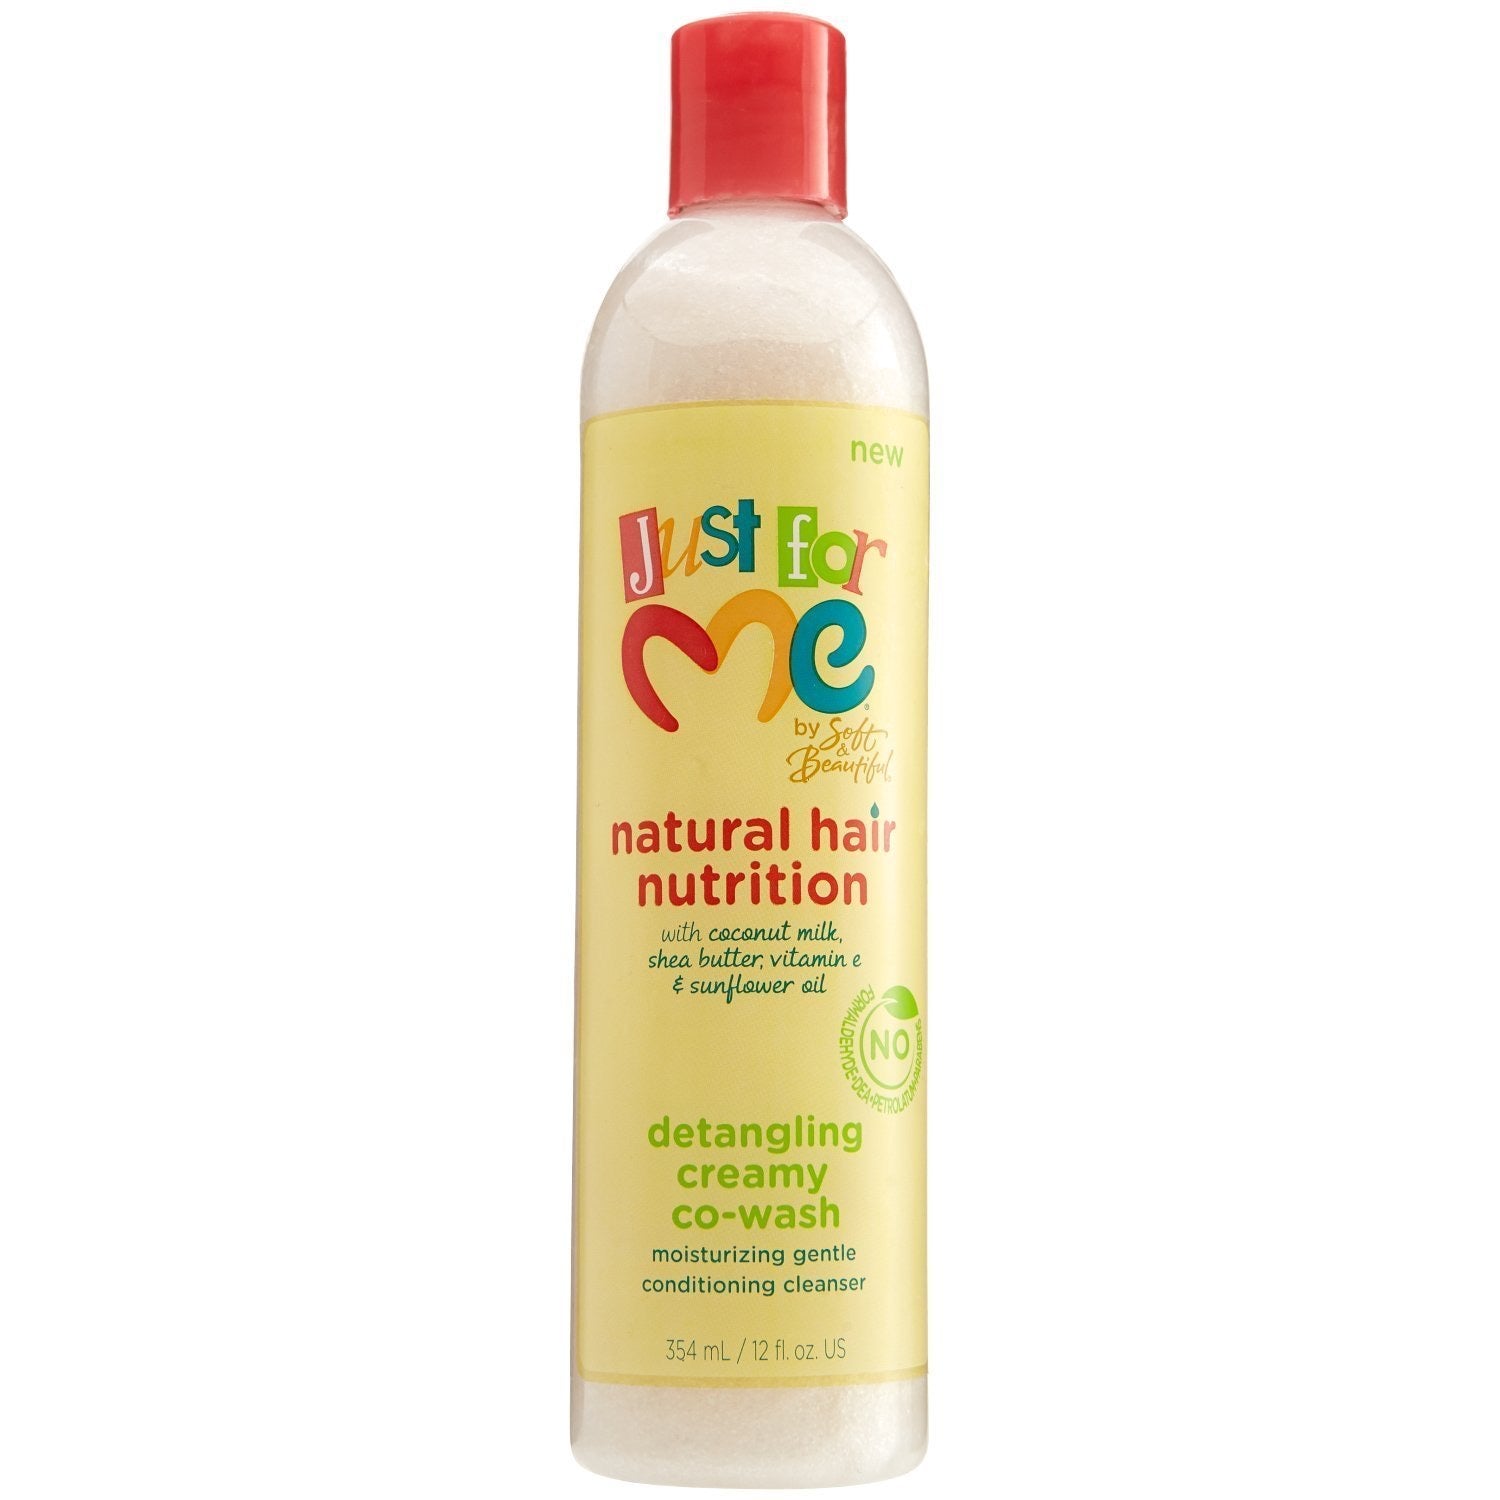 Just for me Natural hair nutrition detangling creamy co wash 12oz